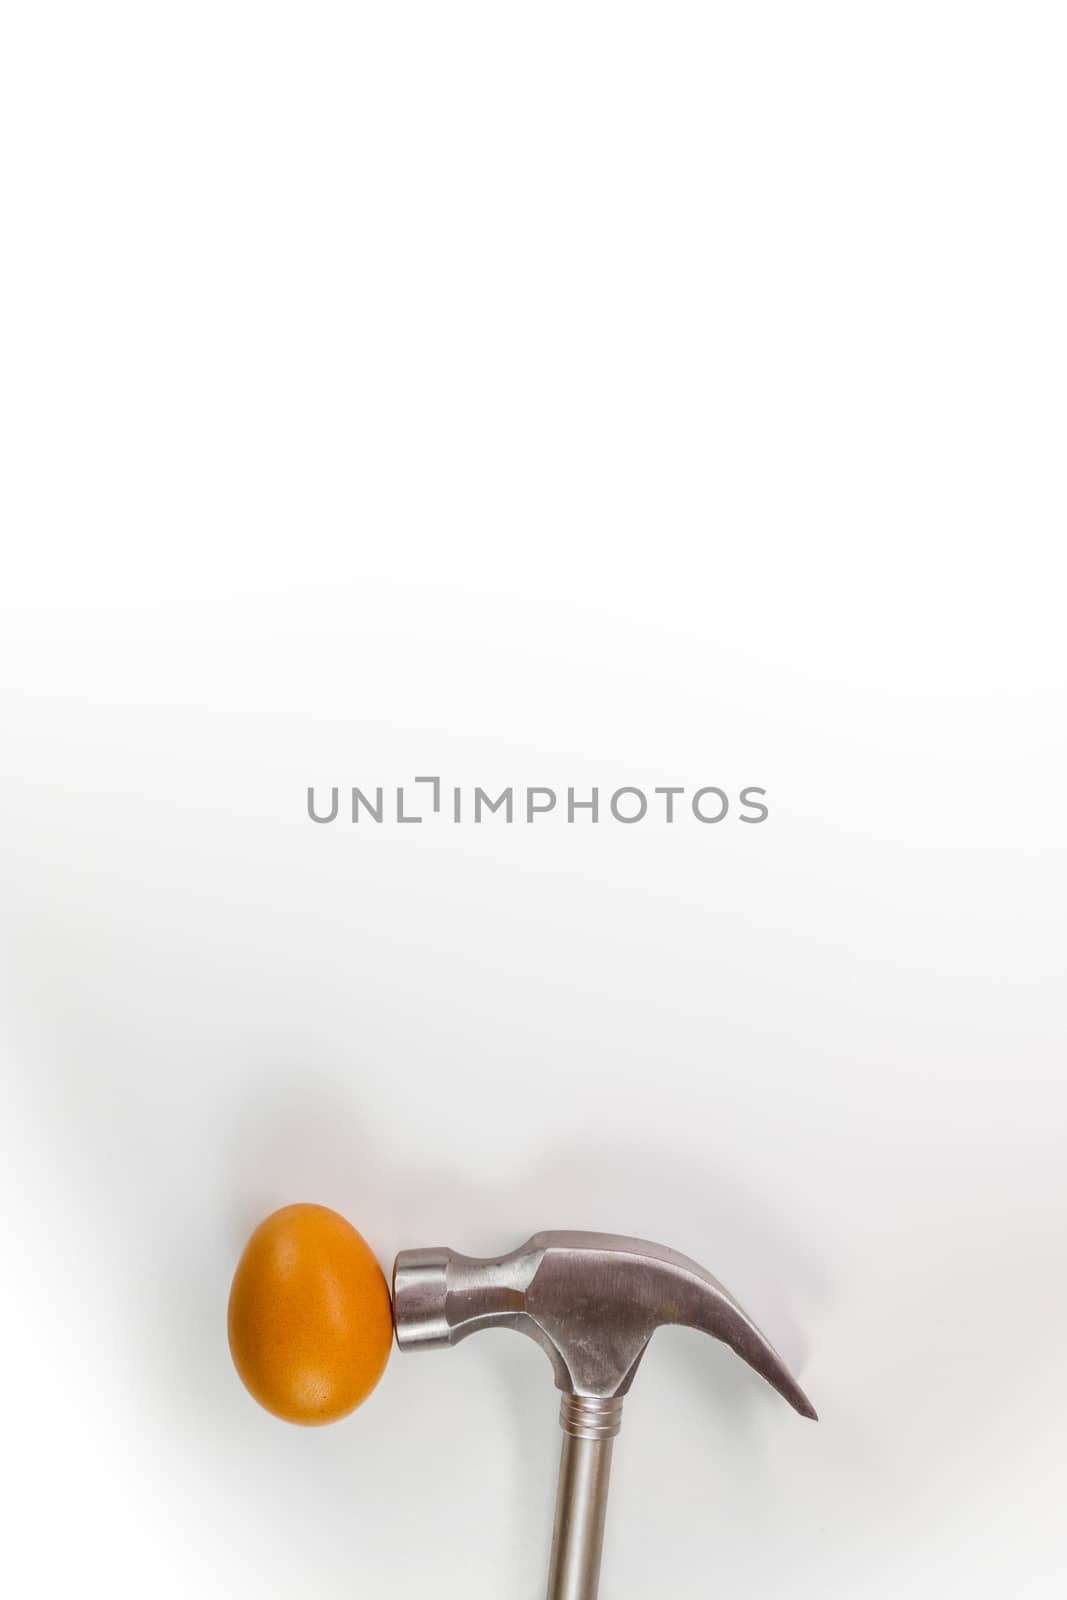 Hammer hitting a egg isolated on white with copy space. by resimone